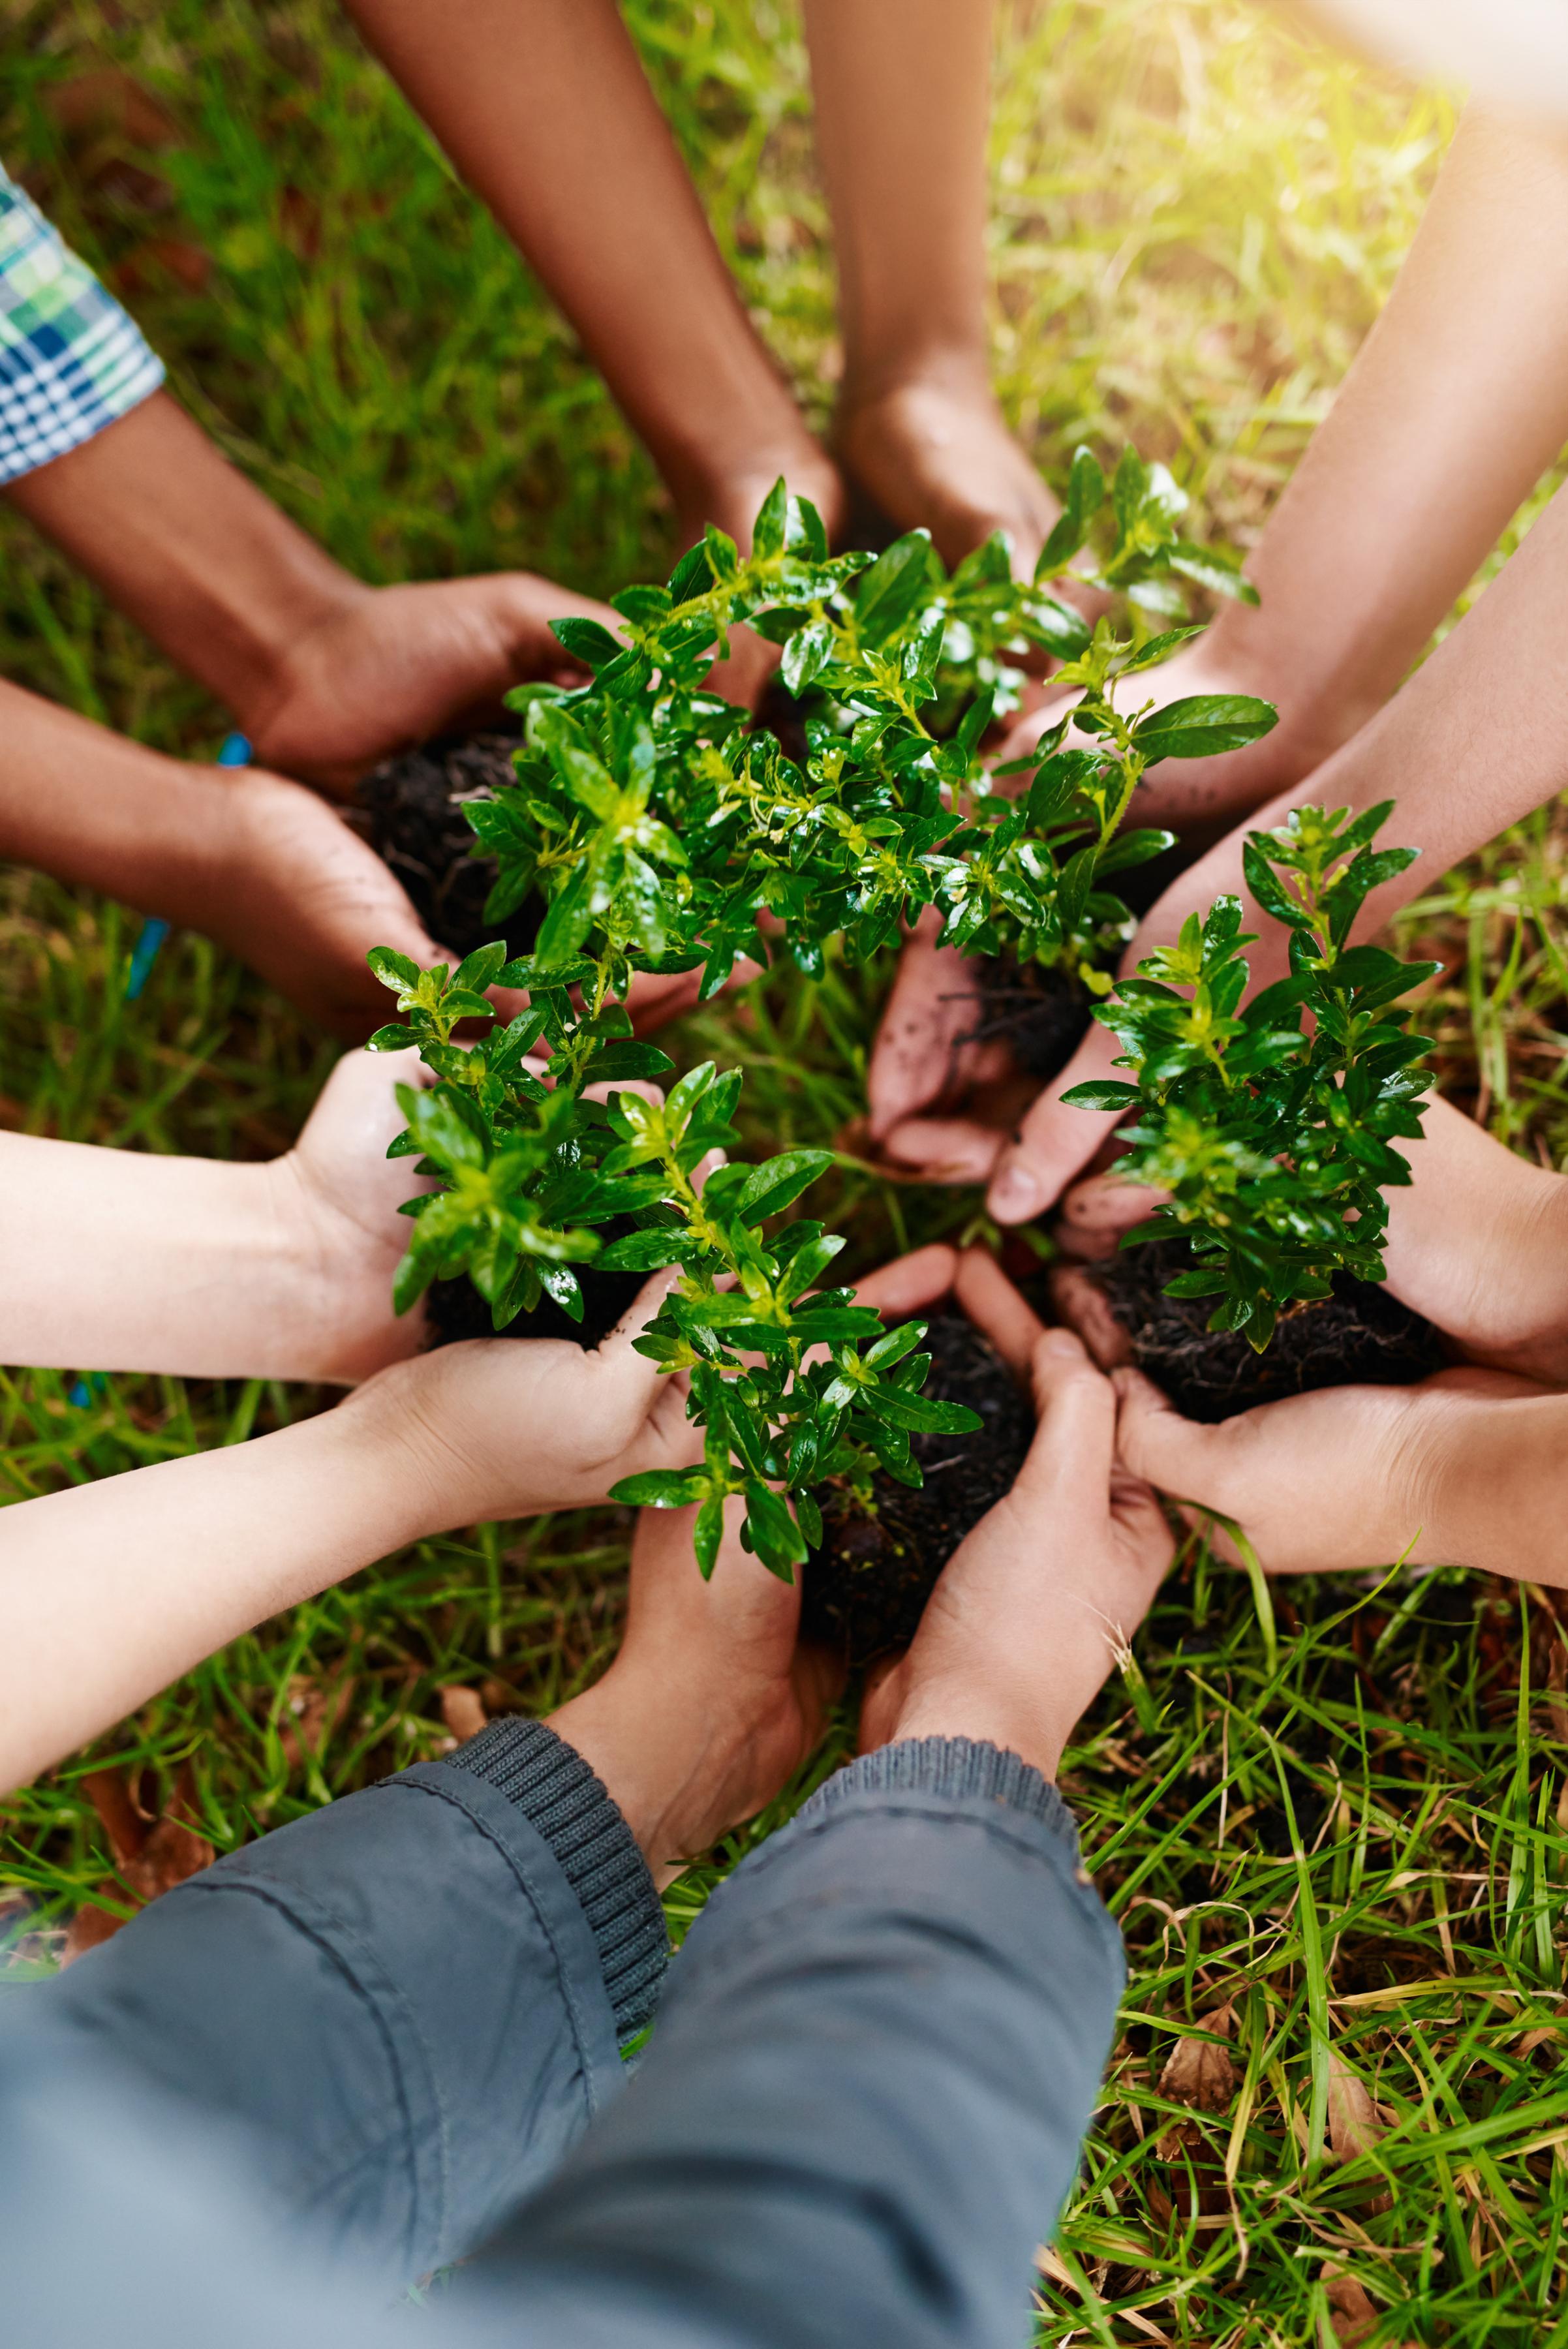 Photo of peoples hands together touching green plants